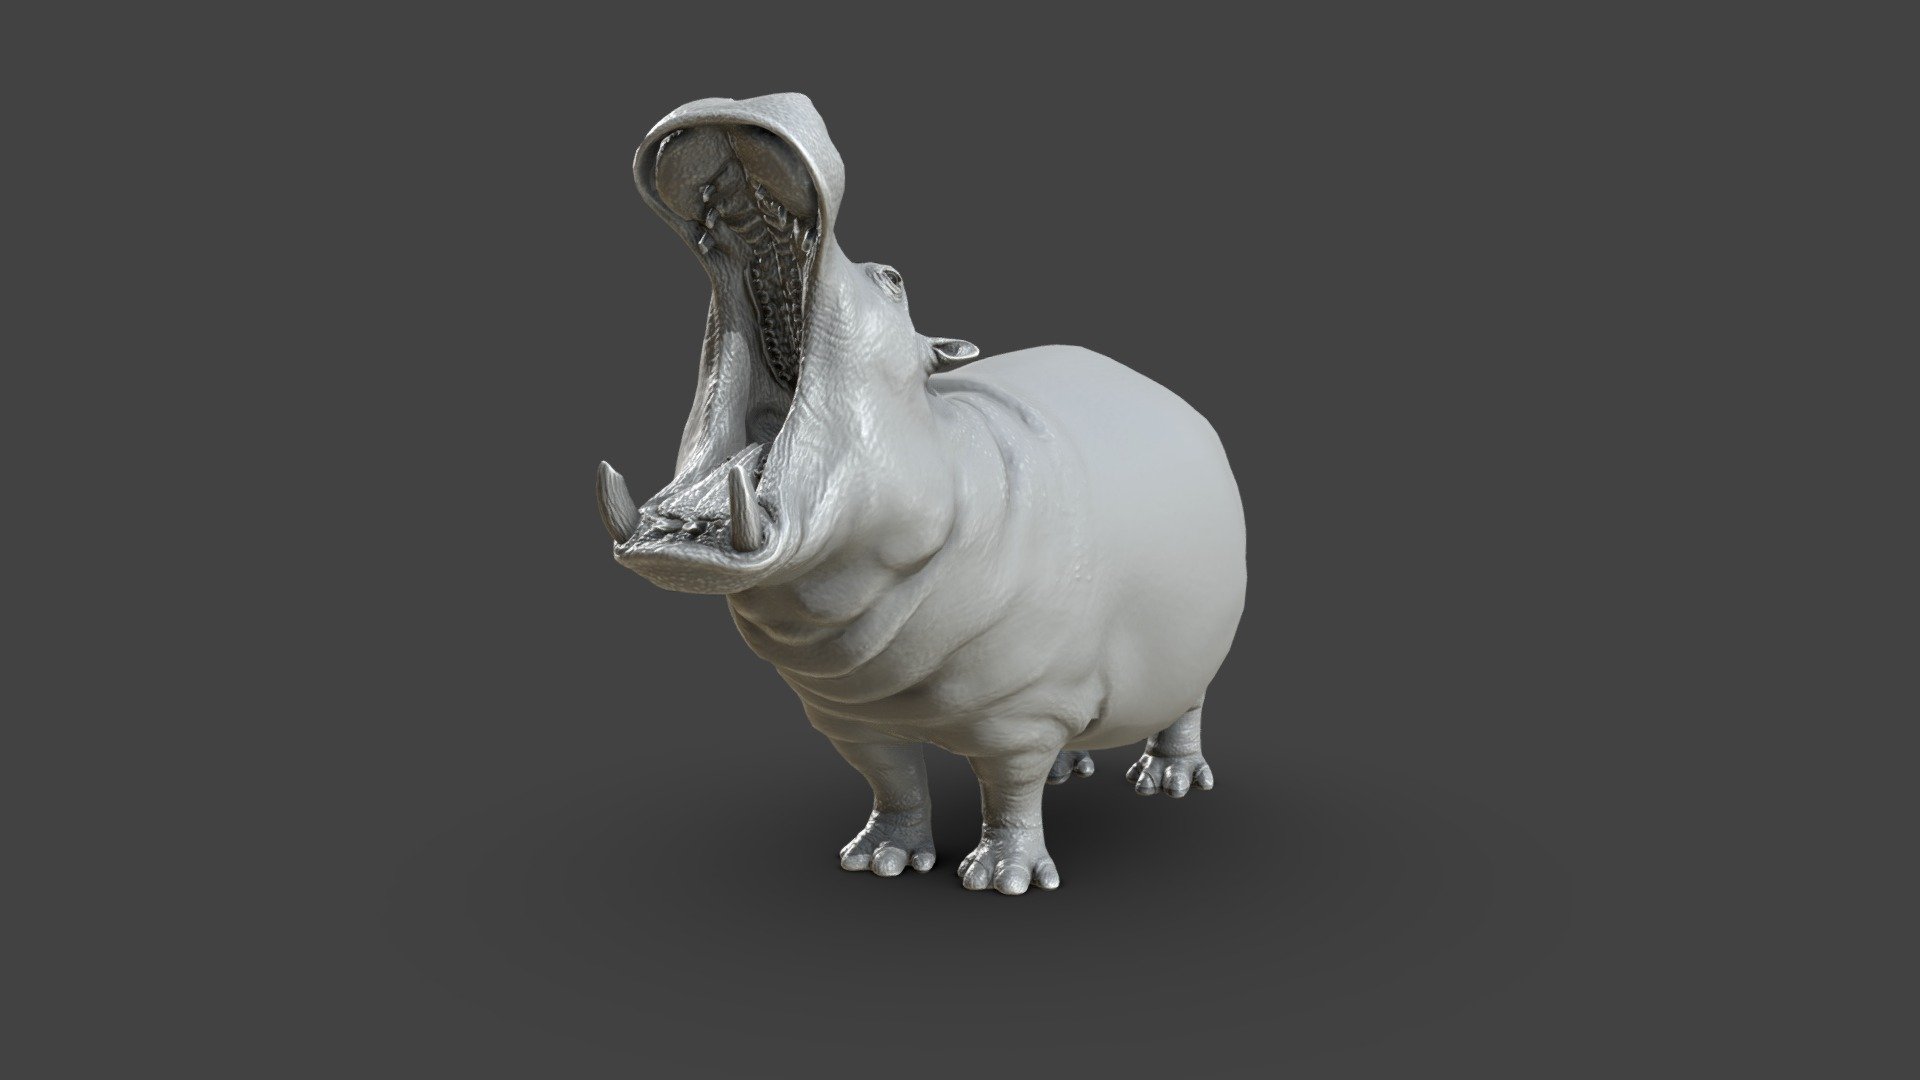 Click the link to get the model:


https://www.artstation.com/a/27997144
Hippopotamus model was made in Zbrush and retopo and UV Unwrap in  Maya with proper topology and looping with Unwraped UV and no over lapping.

Ready for sculpting and texturing&hellip;

File format:





Obj




Fbx




Maya file




Blender file




Zbrush file 



Inside the product:





clean topology




Single Udim 




unwrapped Uvs for texturing




no overlapping UVs




proper naming and grouping




no unwanted shaders and history.



You May also like:


👉 https://skfb.ly/oQ9oN 👈
 - Hippopotamus Sculpt - Buy Royalty Free 3D model by Tashi59 (@tsering) 3d model